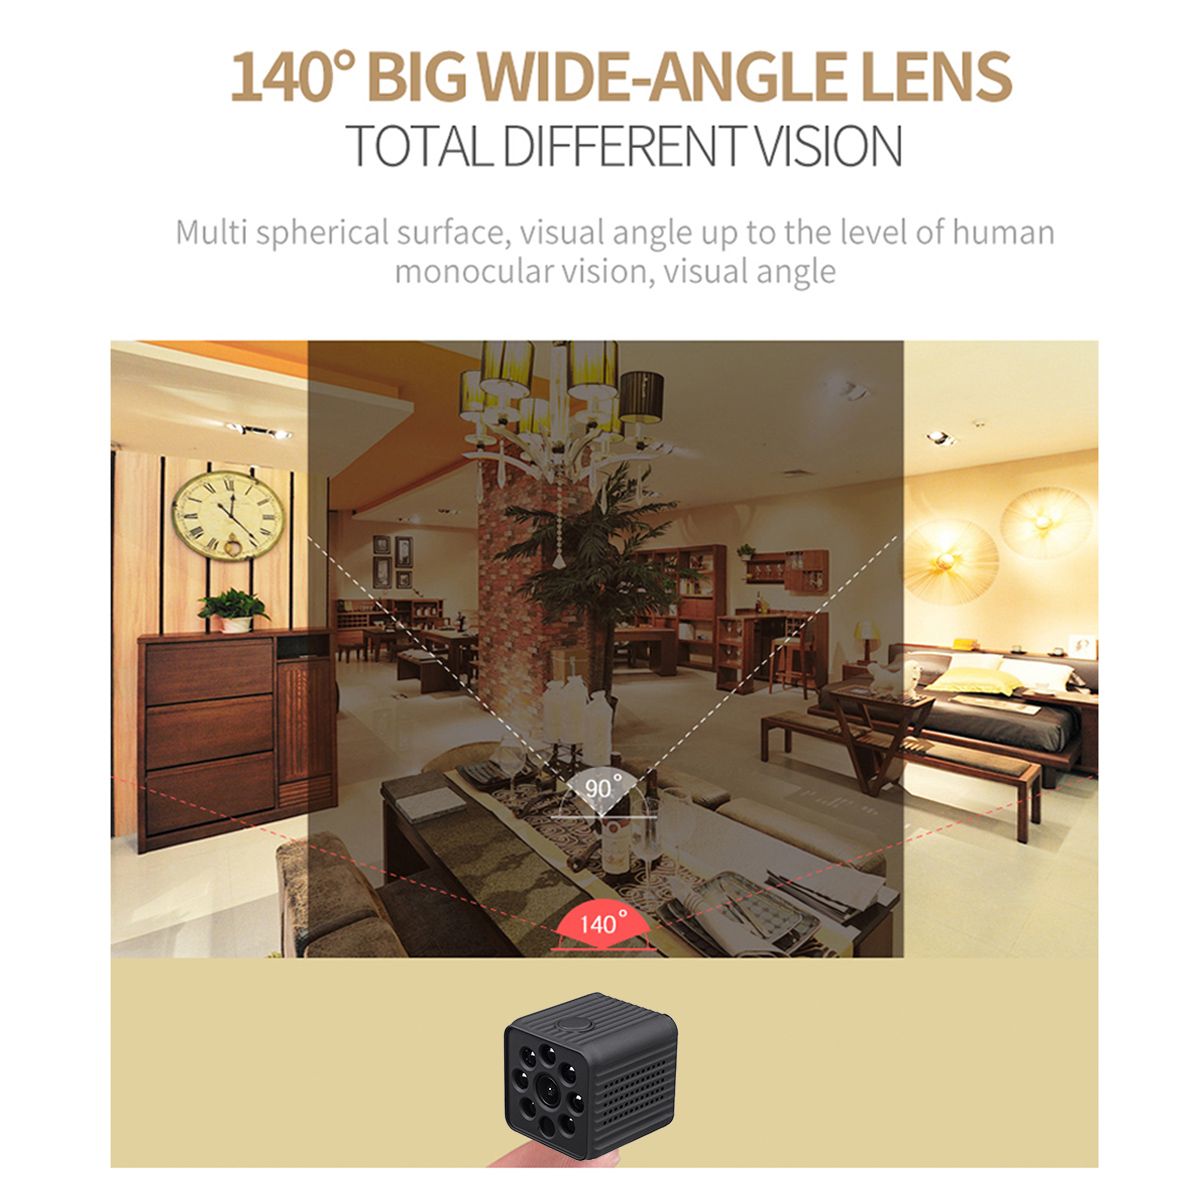 HD-1080P-Wireless-Camera-M-otion-Detection-Night-Vision-CCTV-Home-Security-Wifi-Cam-Bracket-2-Type-I-1610717